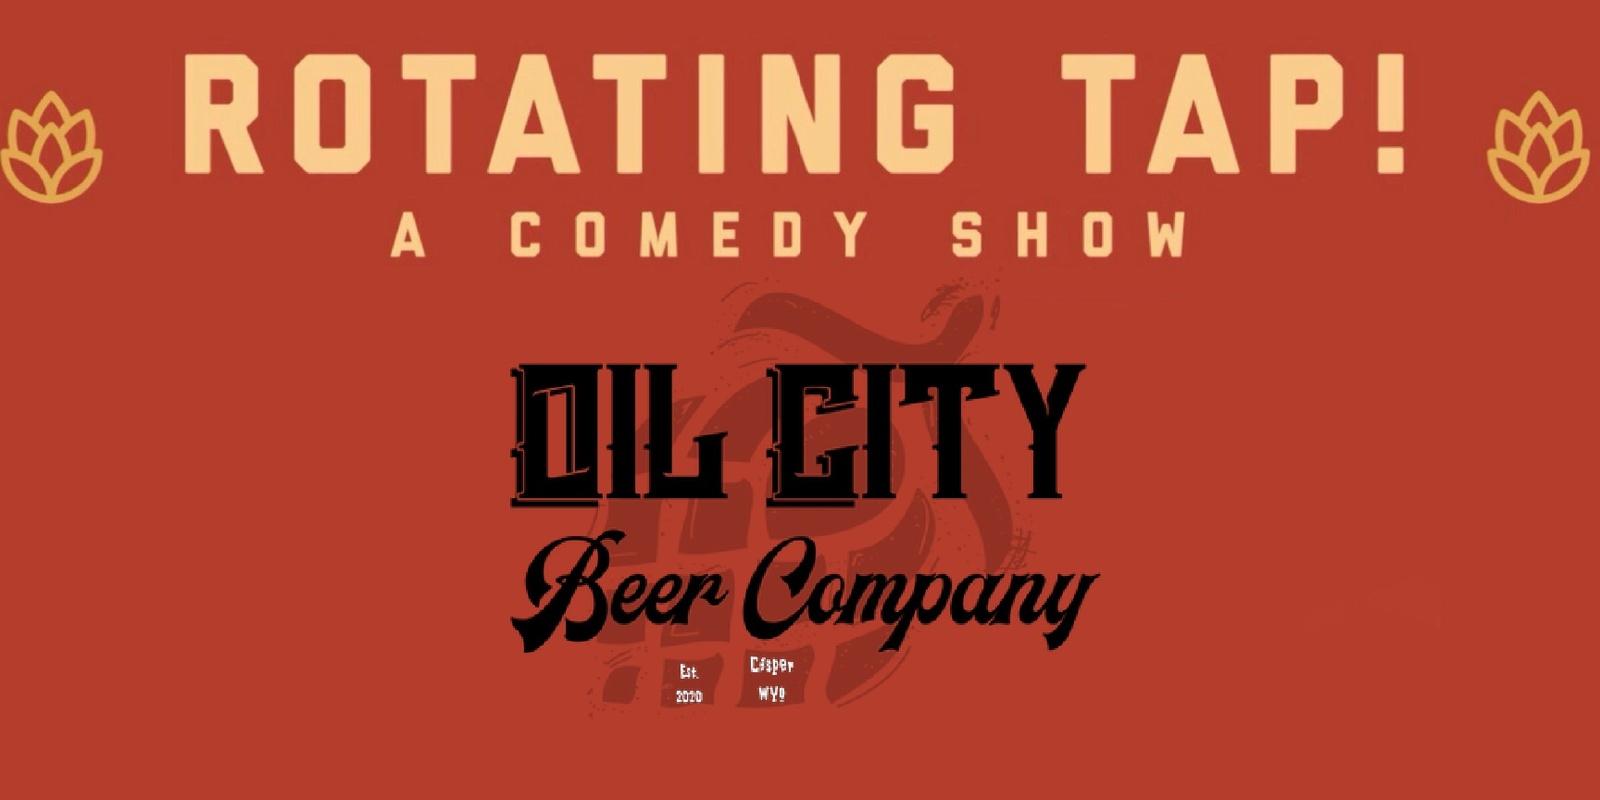 Rotating Tap Comedy @ Oil City Beer Company